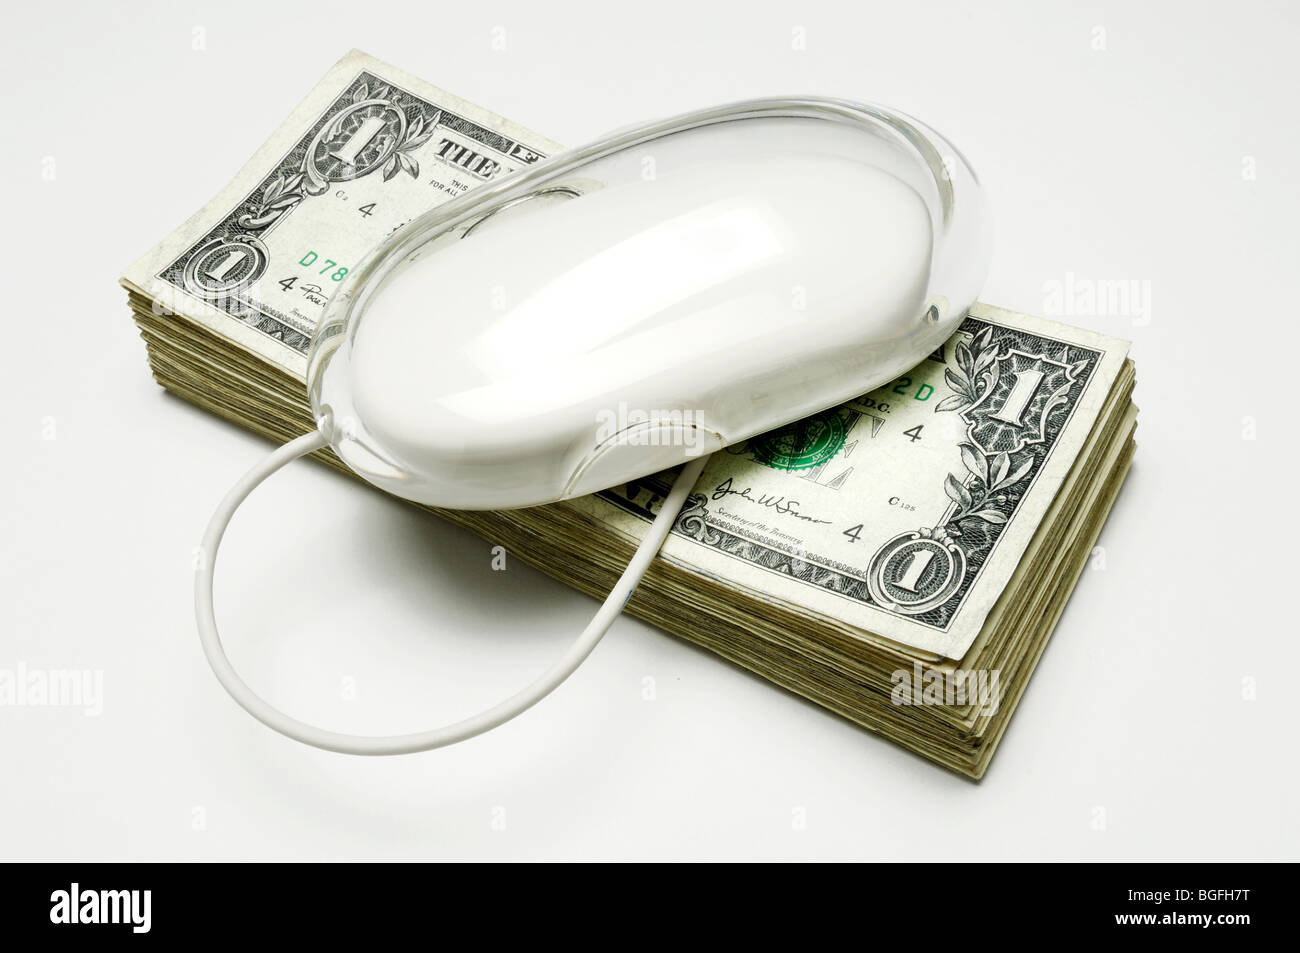 A white computer mouse and cord on a stack of US dollar bills Stock Photo